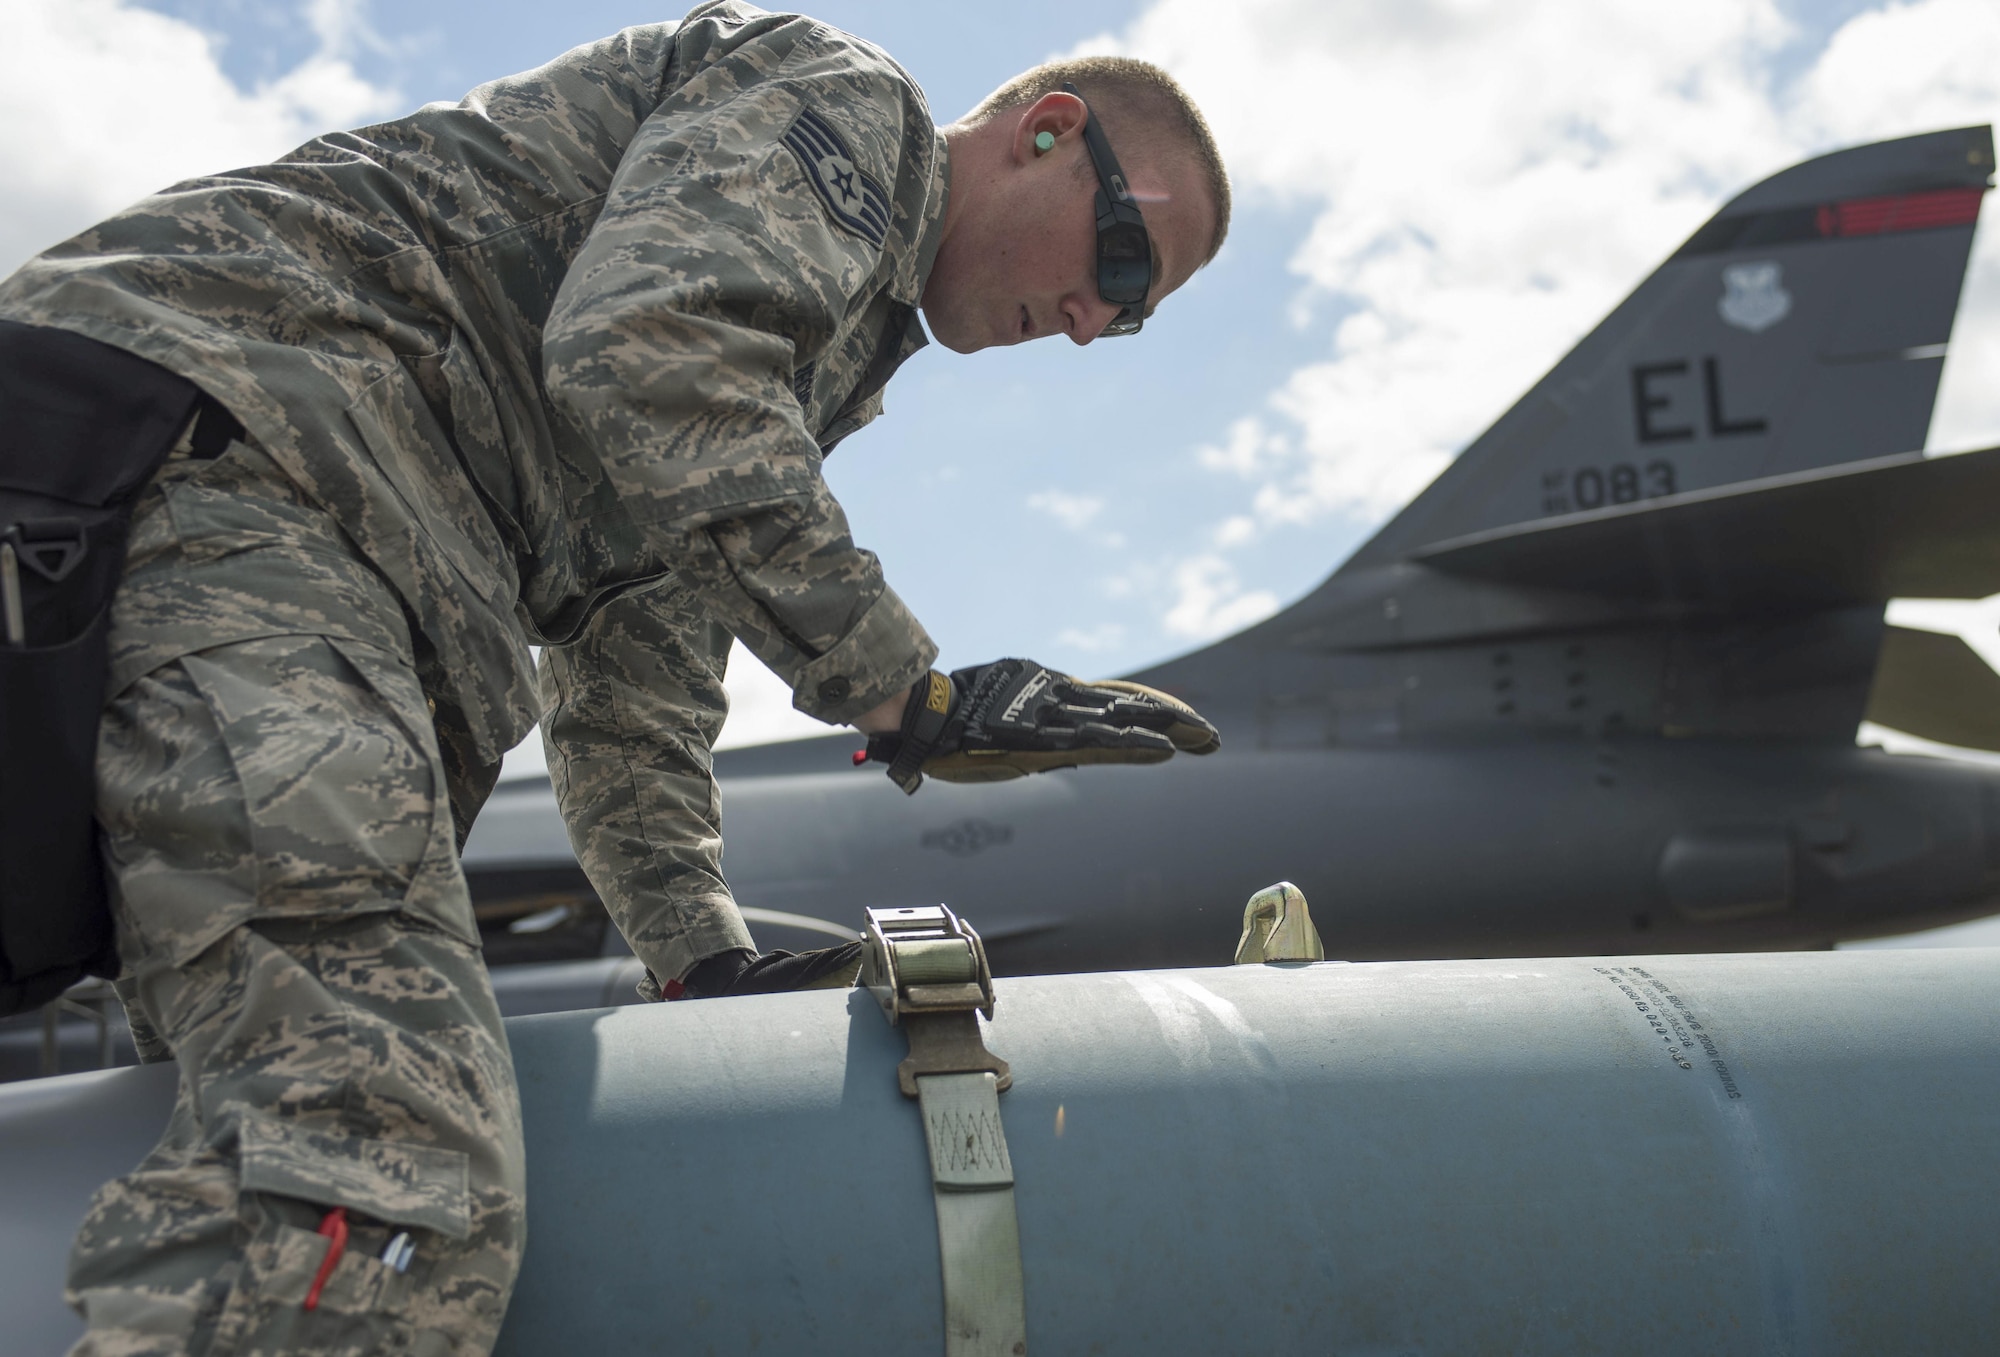 U.S. Air Force Staff Sgt. Matthew Milbrecht, 28th Aircraft Maintenance Squadron weapons load crew chief, straps down a BDU-56, (inert munition) a general purpose unguided conventional weapon, at Royal Air Force Fairford, U.K., June 7, 2017. Airmen from the 28th Aircraft Maintenance Squadron are supporting bomber assurance and deterrence missions in the European theatre that combine training opportunities and greatly improve interoperability among participating NATO allies and regional partners. (U.S. Air Force photo by Airman 1st Class Randahl J. Jenson)